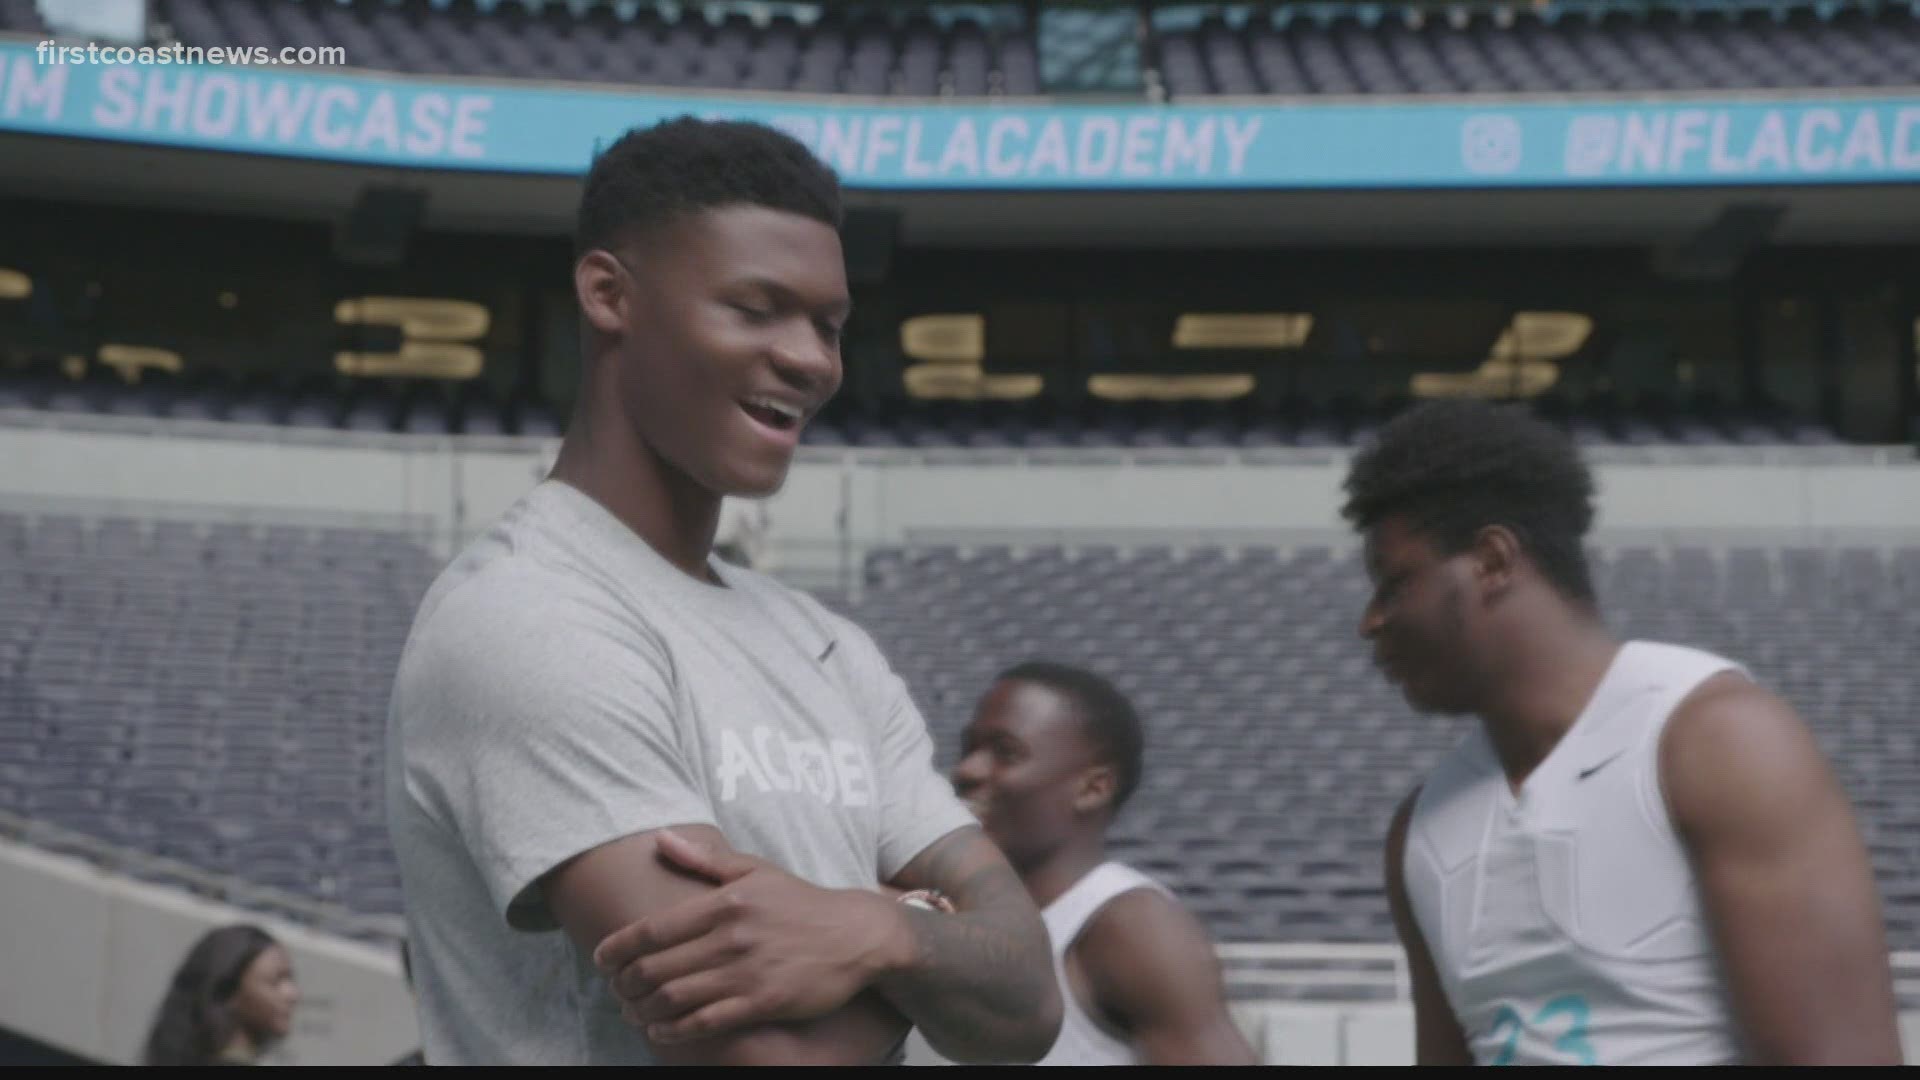 As part of Tegna's "Hometown Heroes" initiative, Jaguars' wide receiver DJ Chark opens up about his struggles with anxiety.